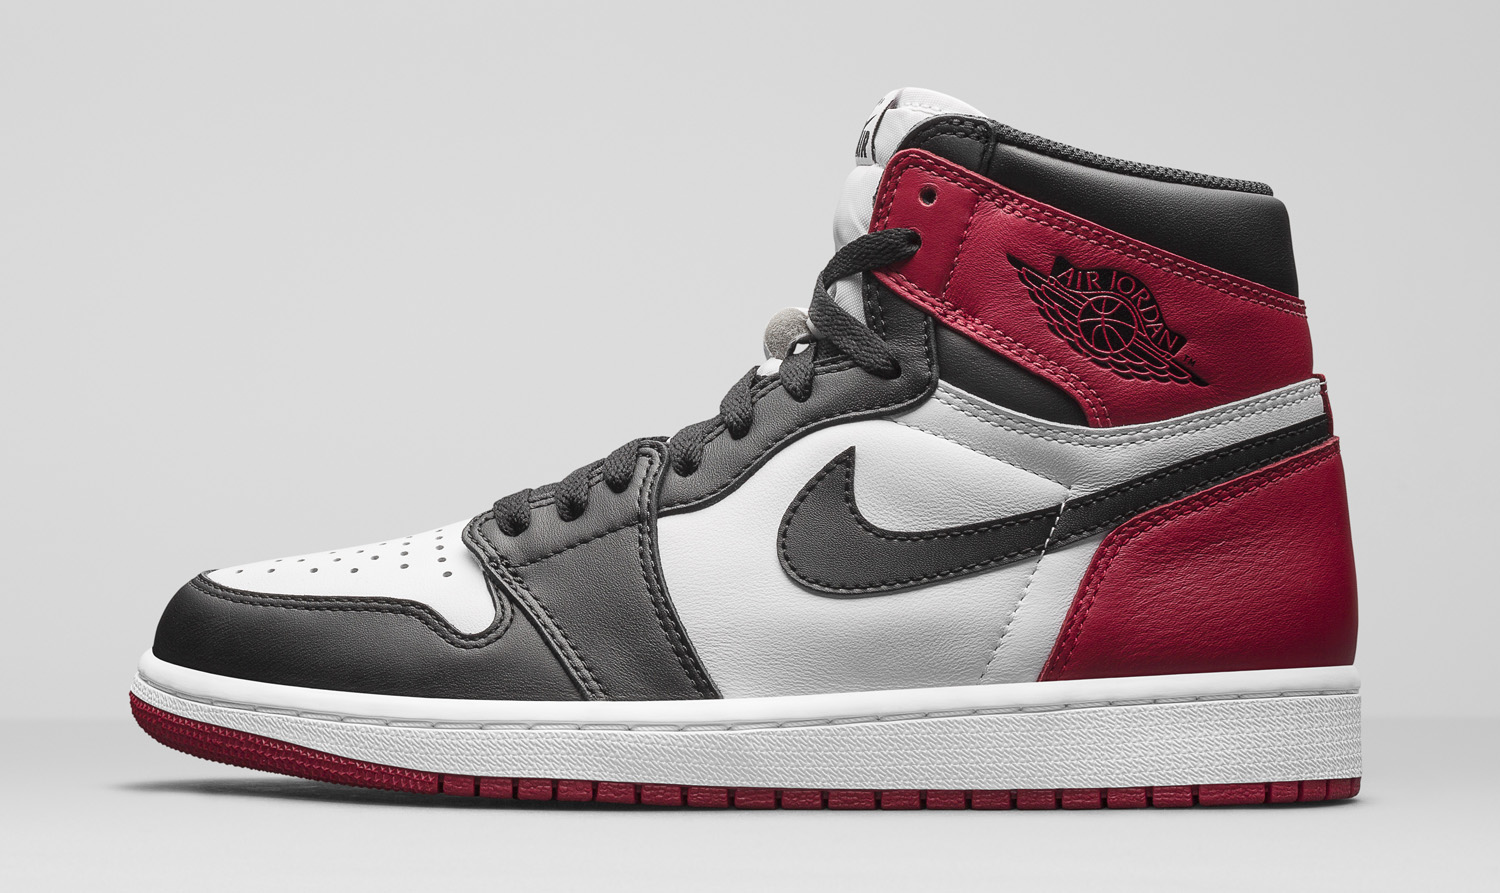 The Air Jordan 1 'Black Toe' Gets an Official Release Date WearTesters